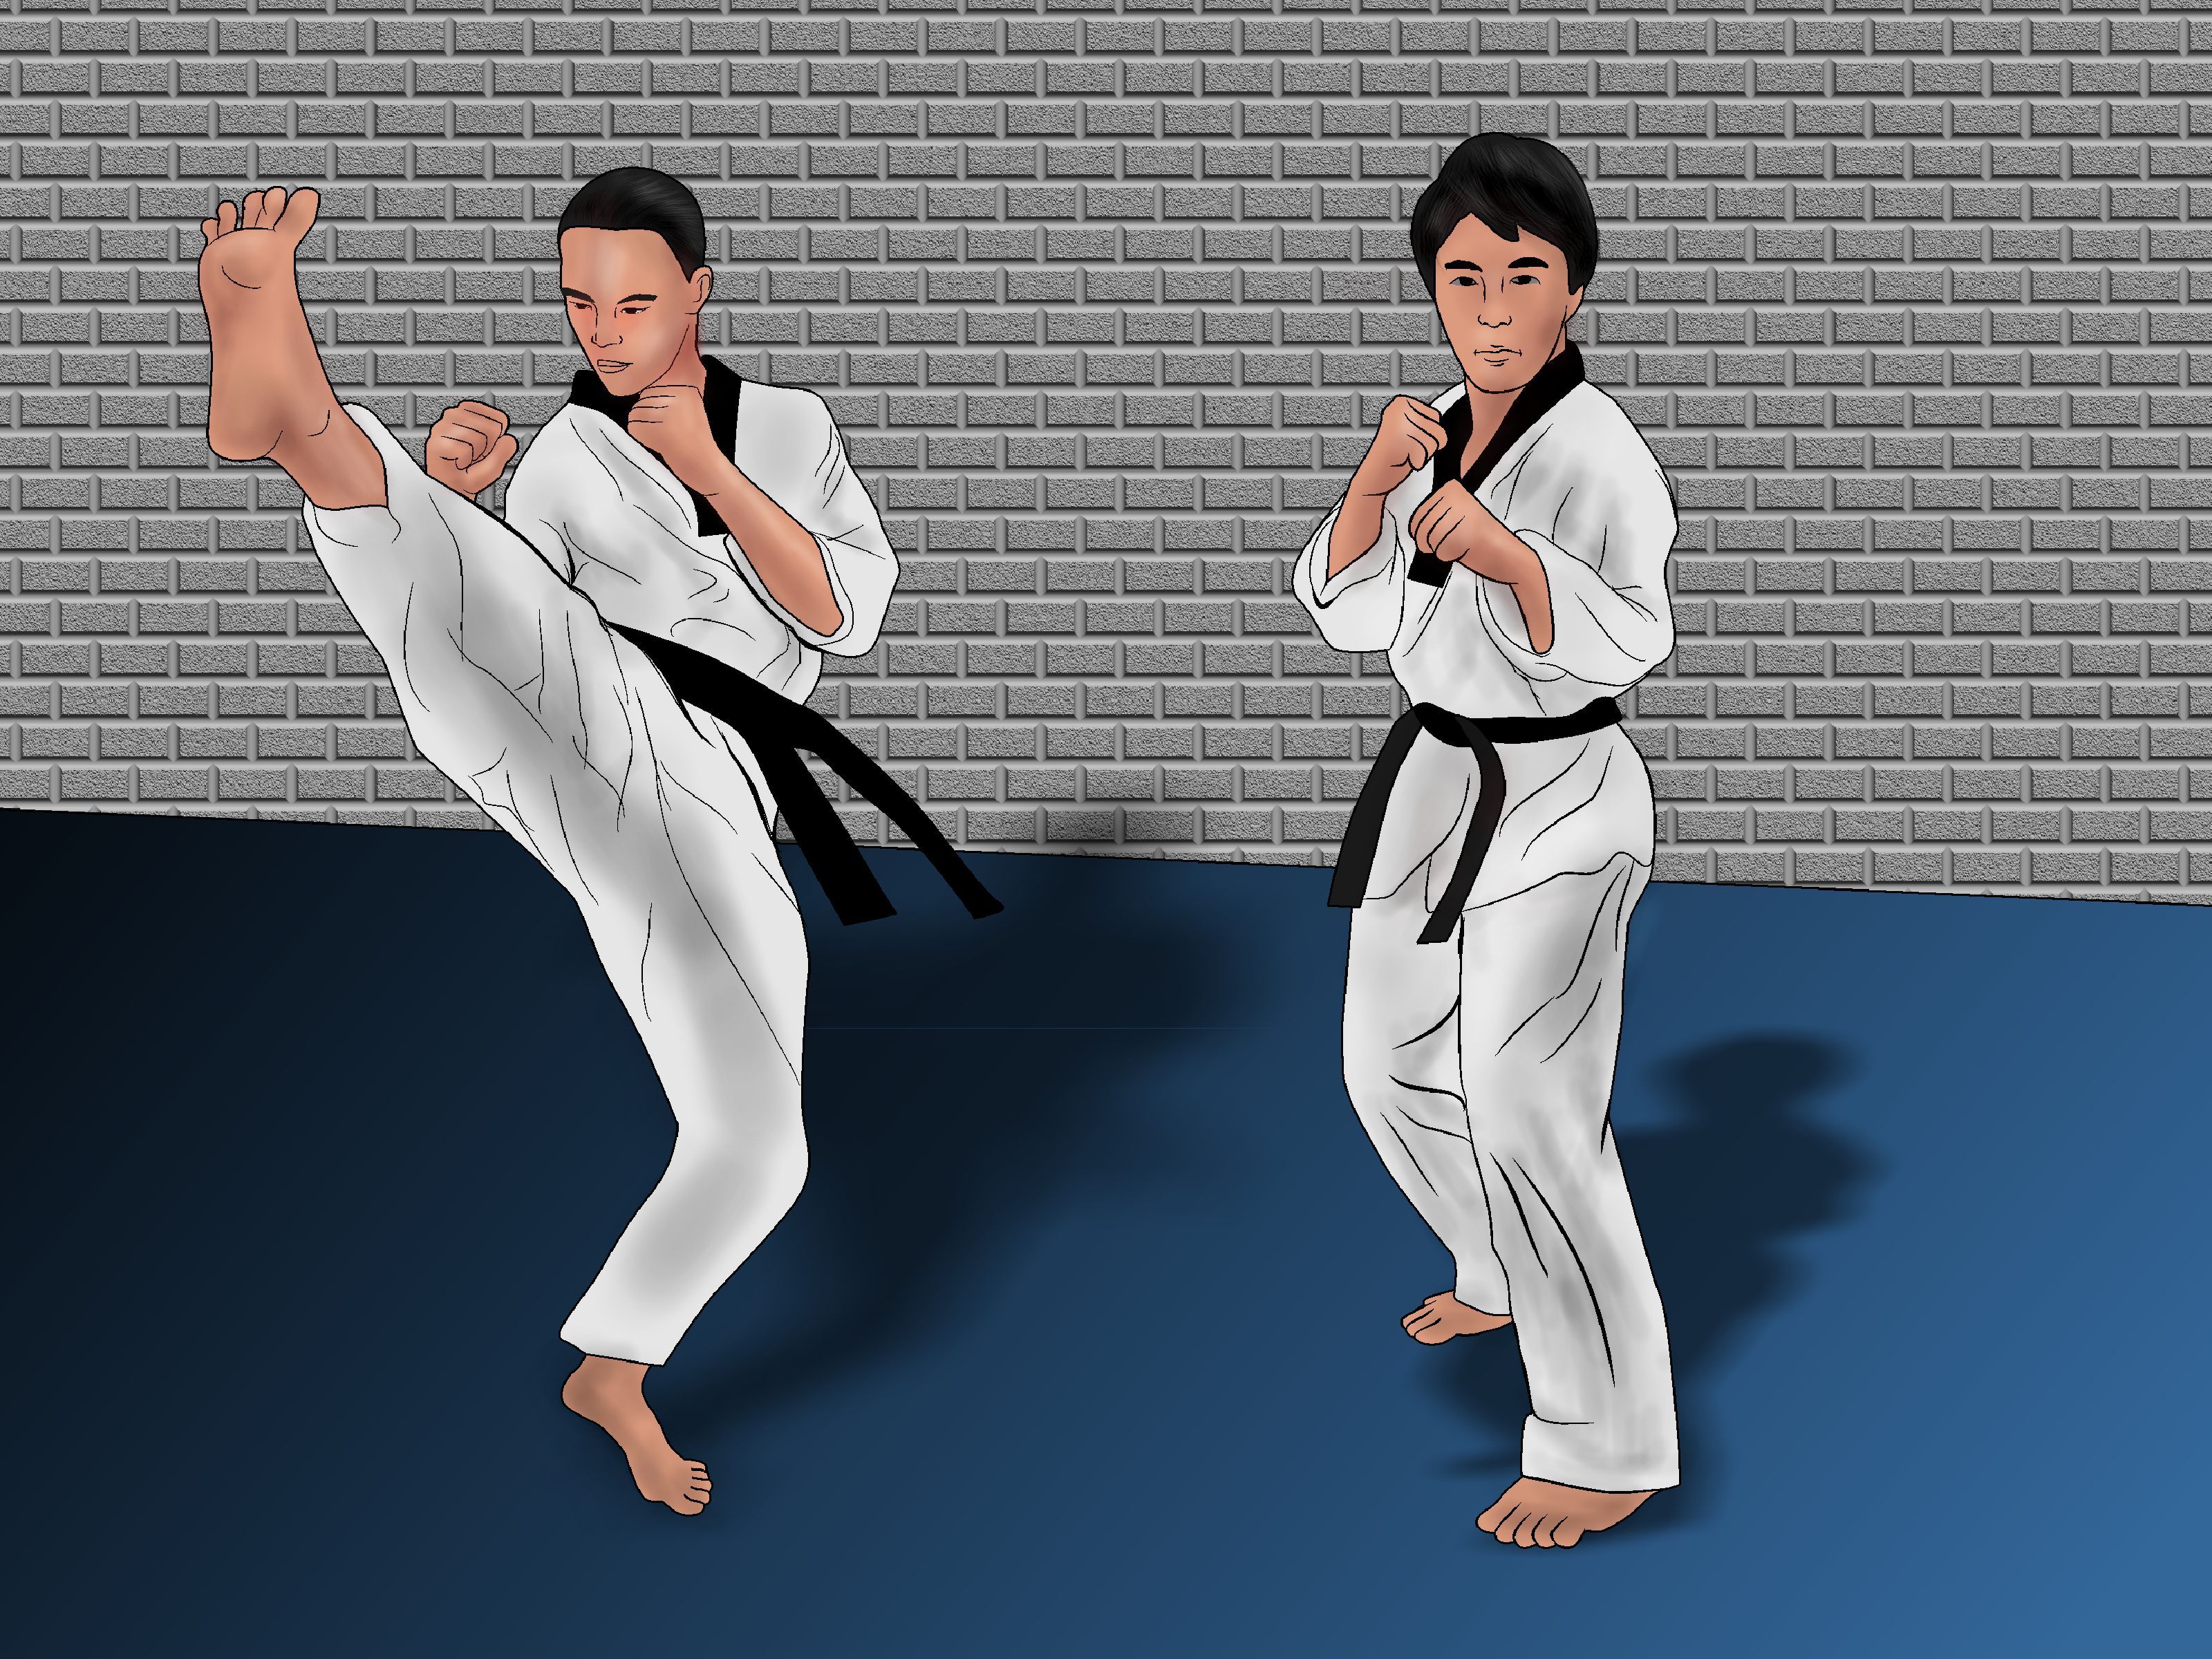 Ways to Win in Competitive Sparring (Taekwondo)